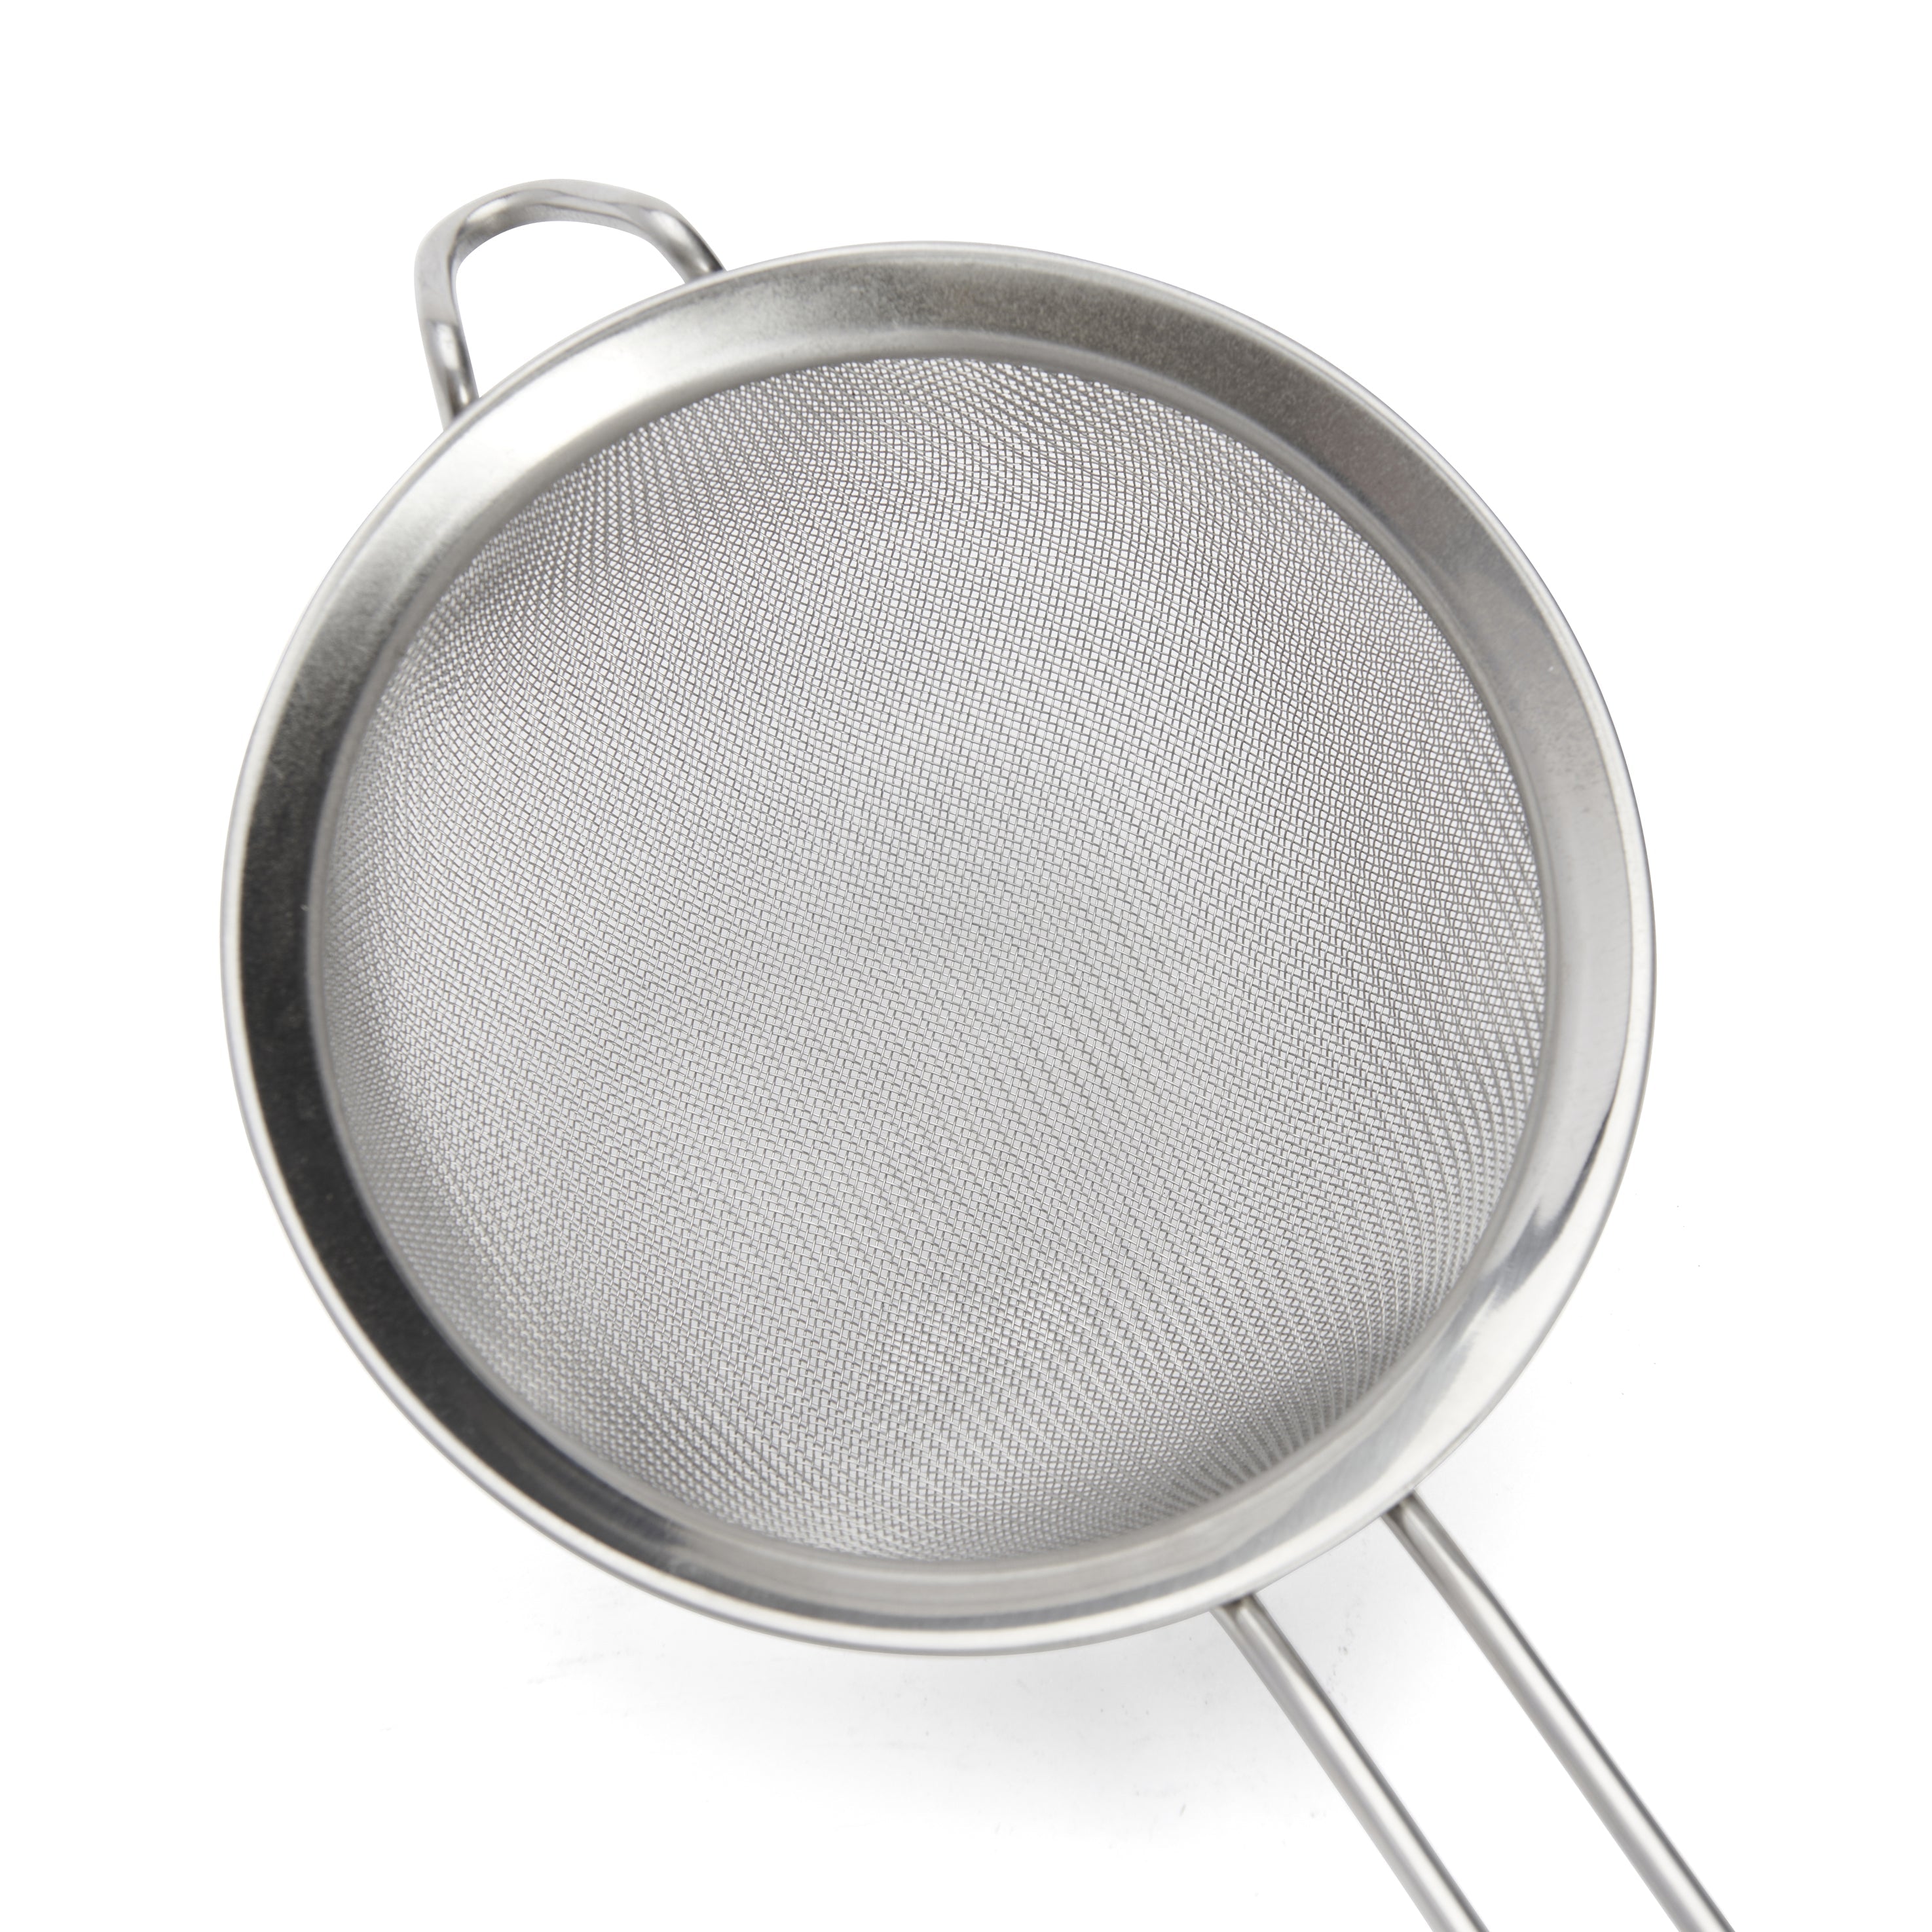 Strainer/Sifter